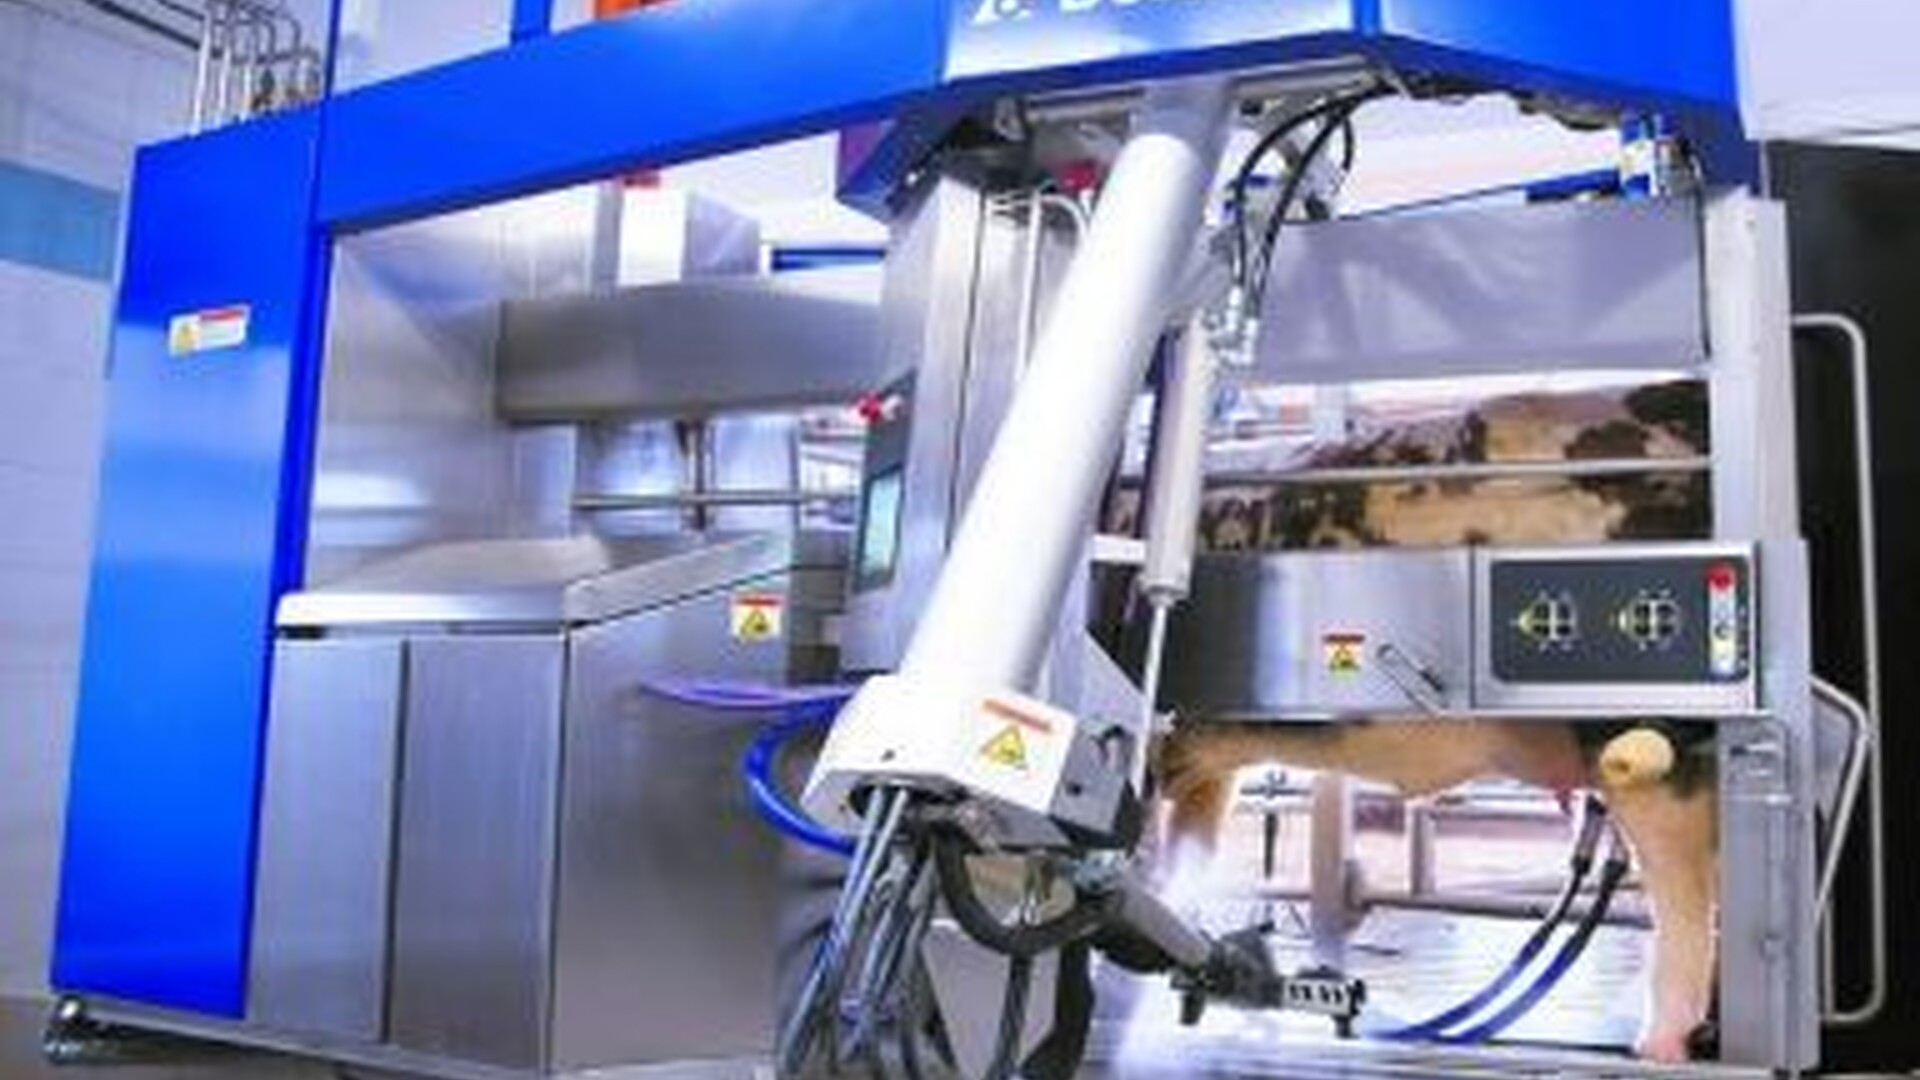 Revolutionizing Milking Operations: The Benefits of DeLaval’s Batch Milking Technology